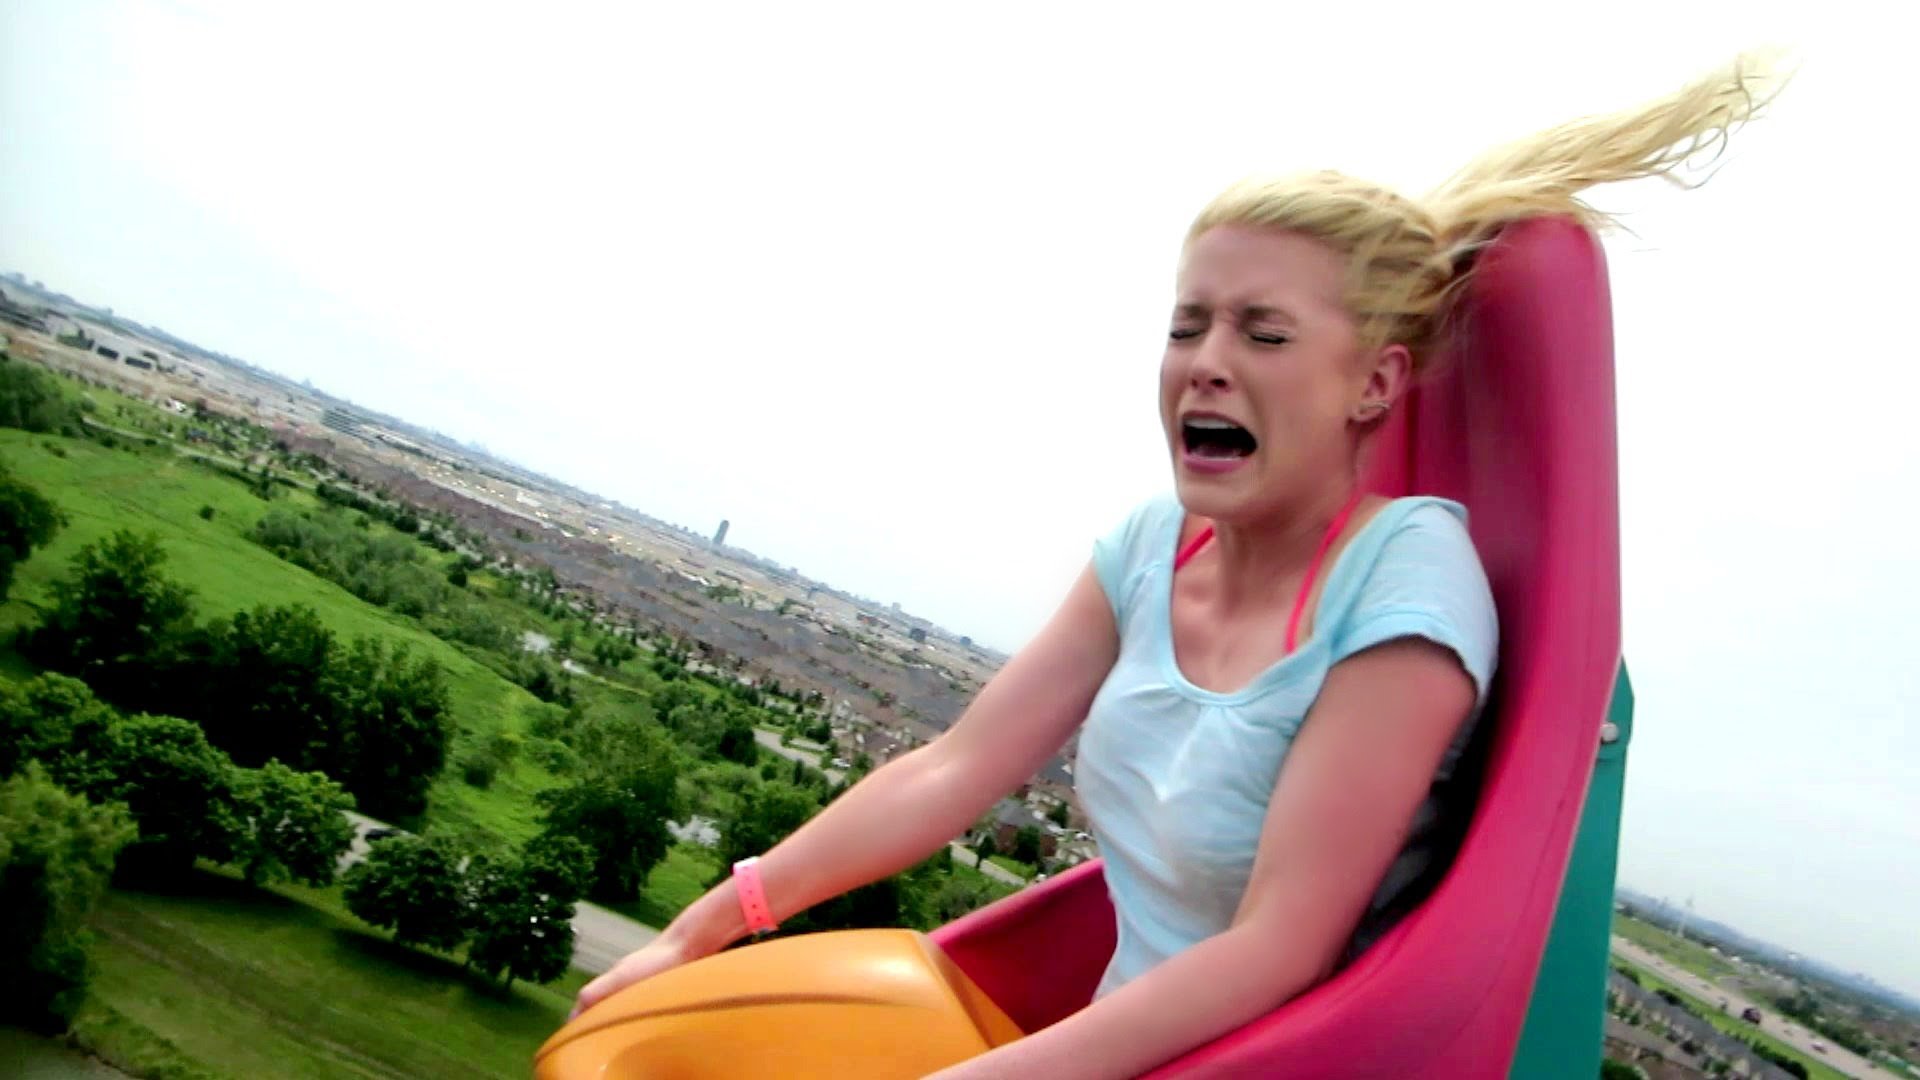 Blue-haired petite teen riding a roller coaster - wide 11